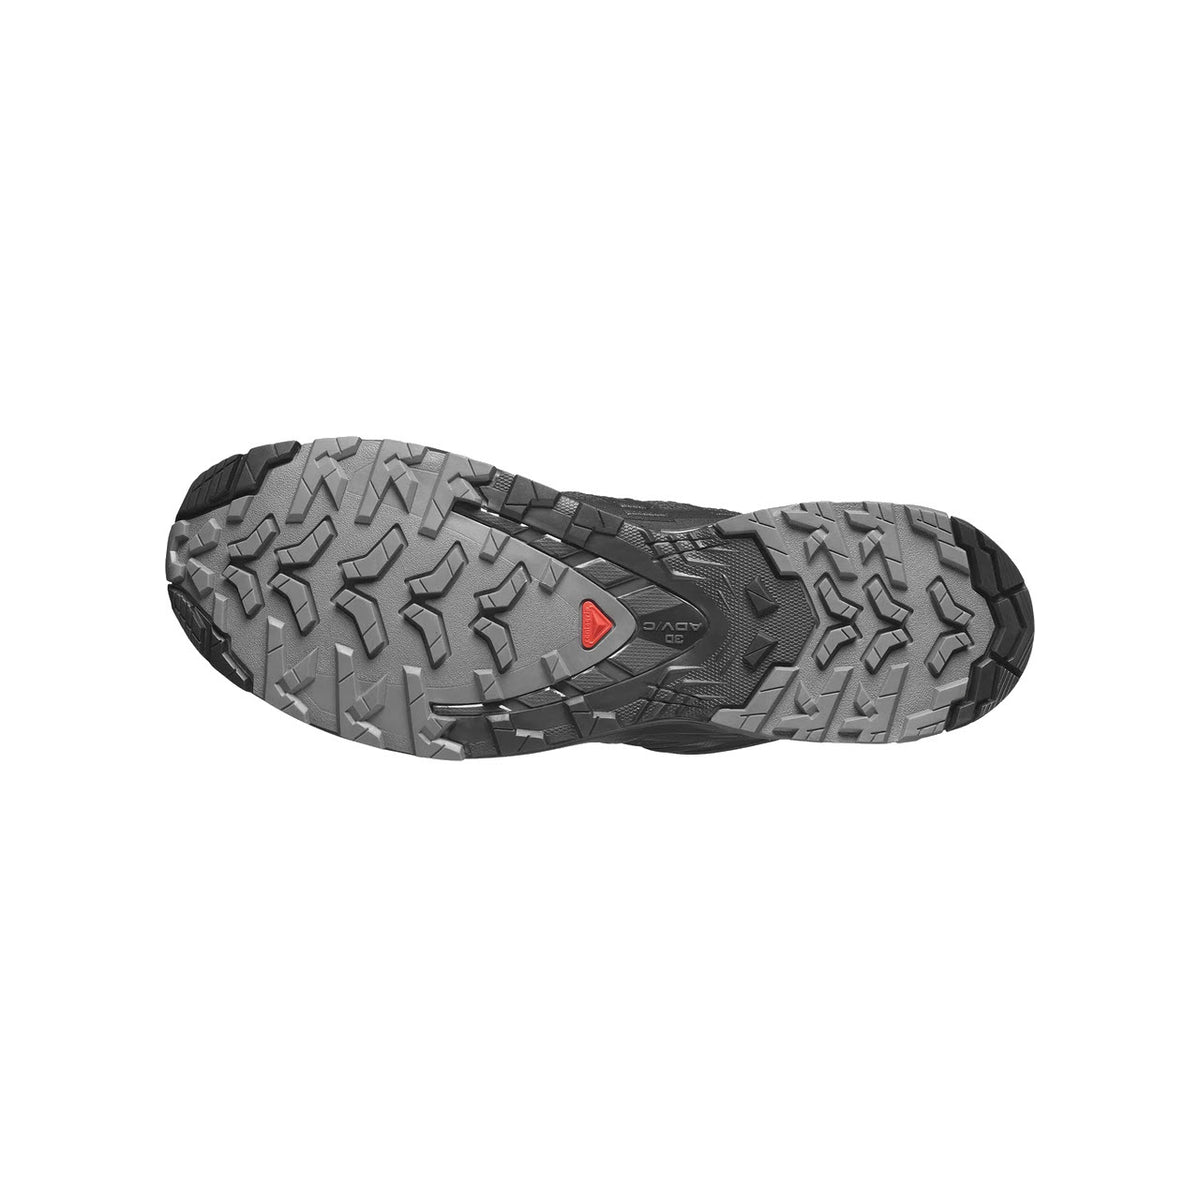 Sole of a Salomon XA Pro 3D V9 trail running boot featuring multi-directional tread patterns and a red triangular logo.